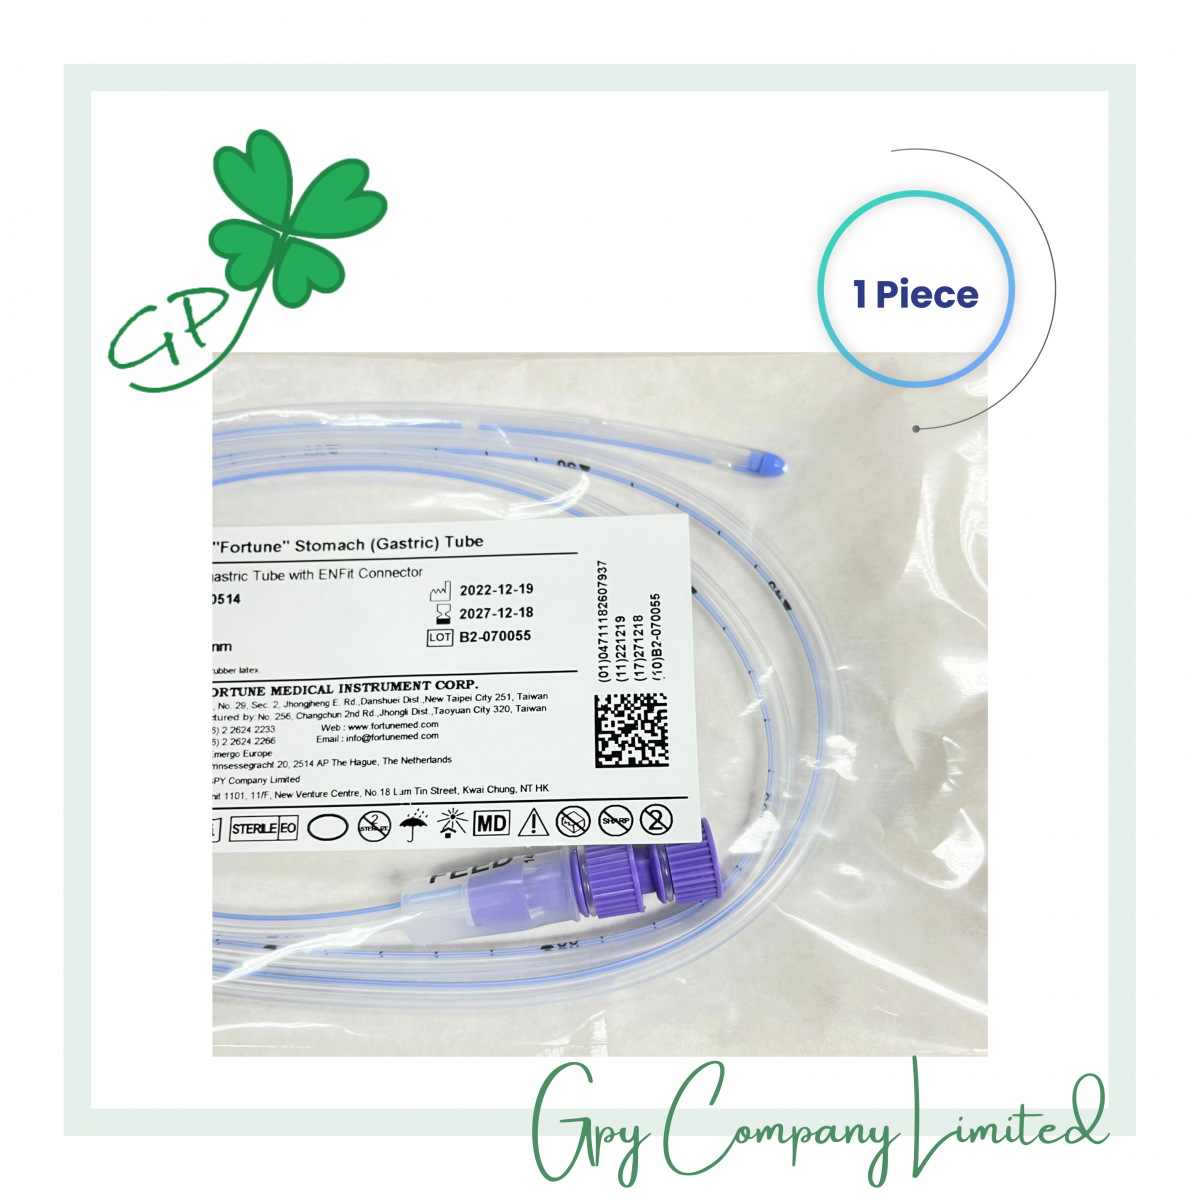 Silicone Gastric Tube, Detachable Type - Fortune Medical Instrument Corp.